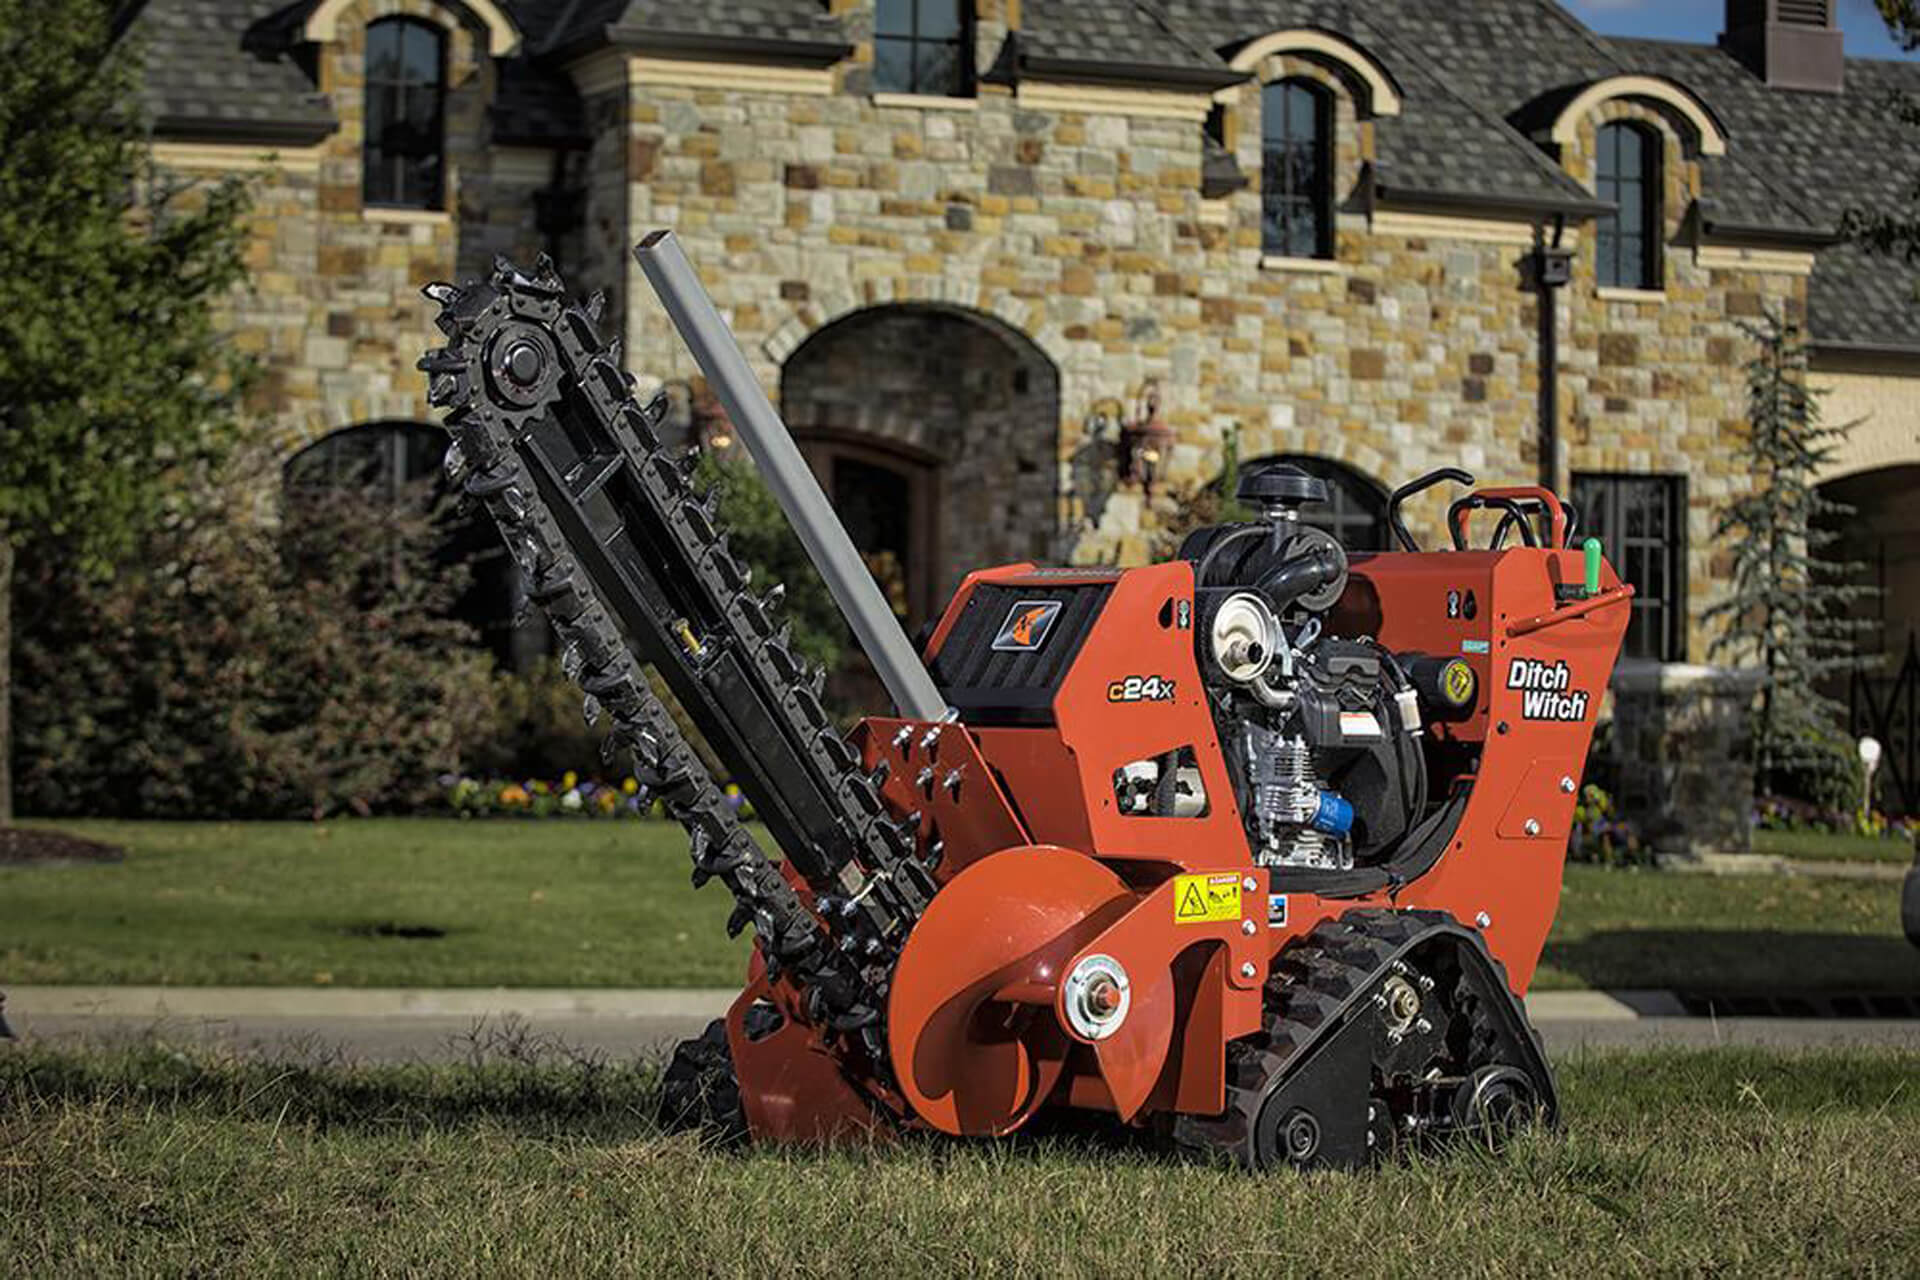 Trenchless machine used with Evans Outdoors